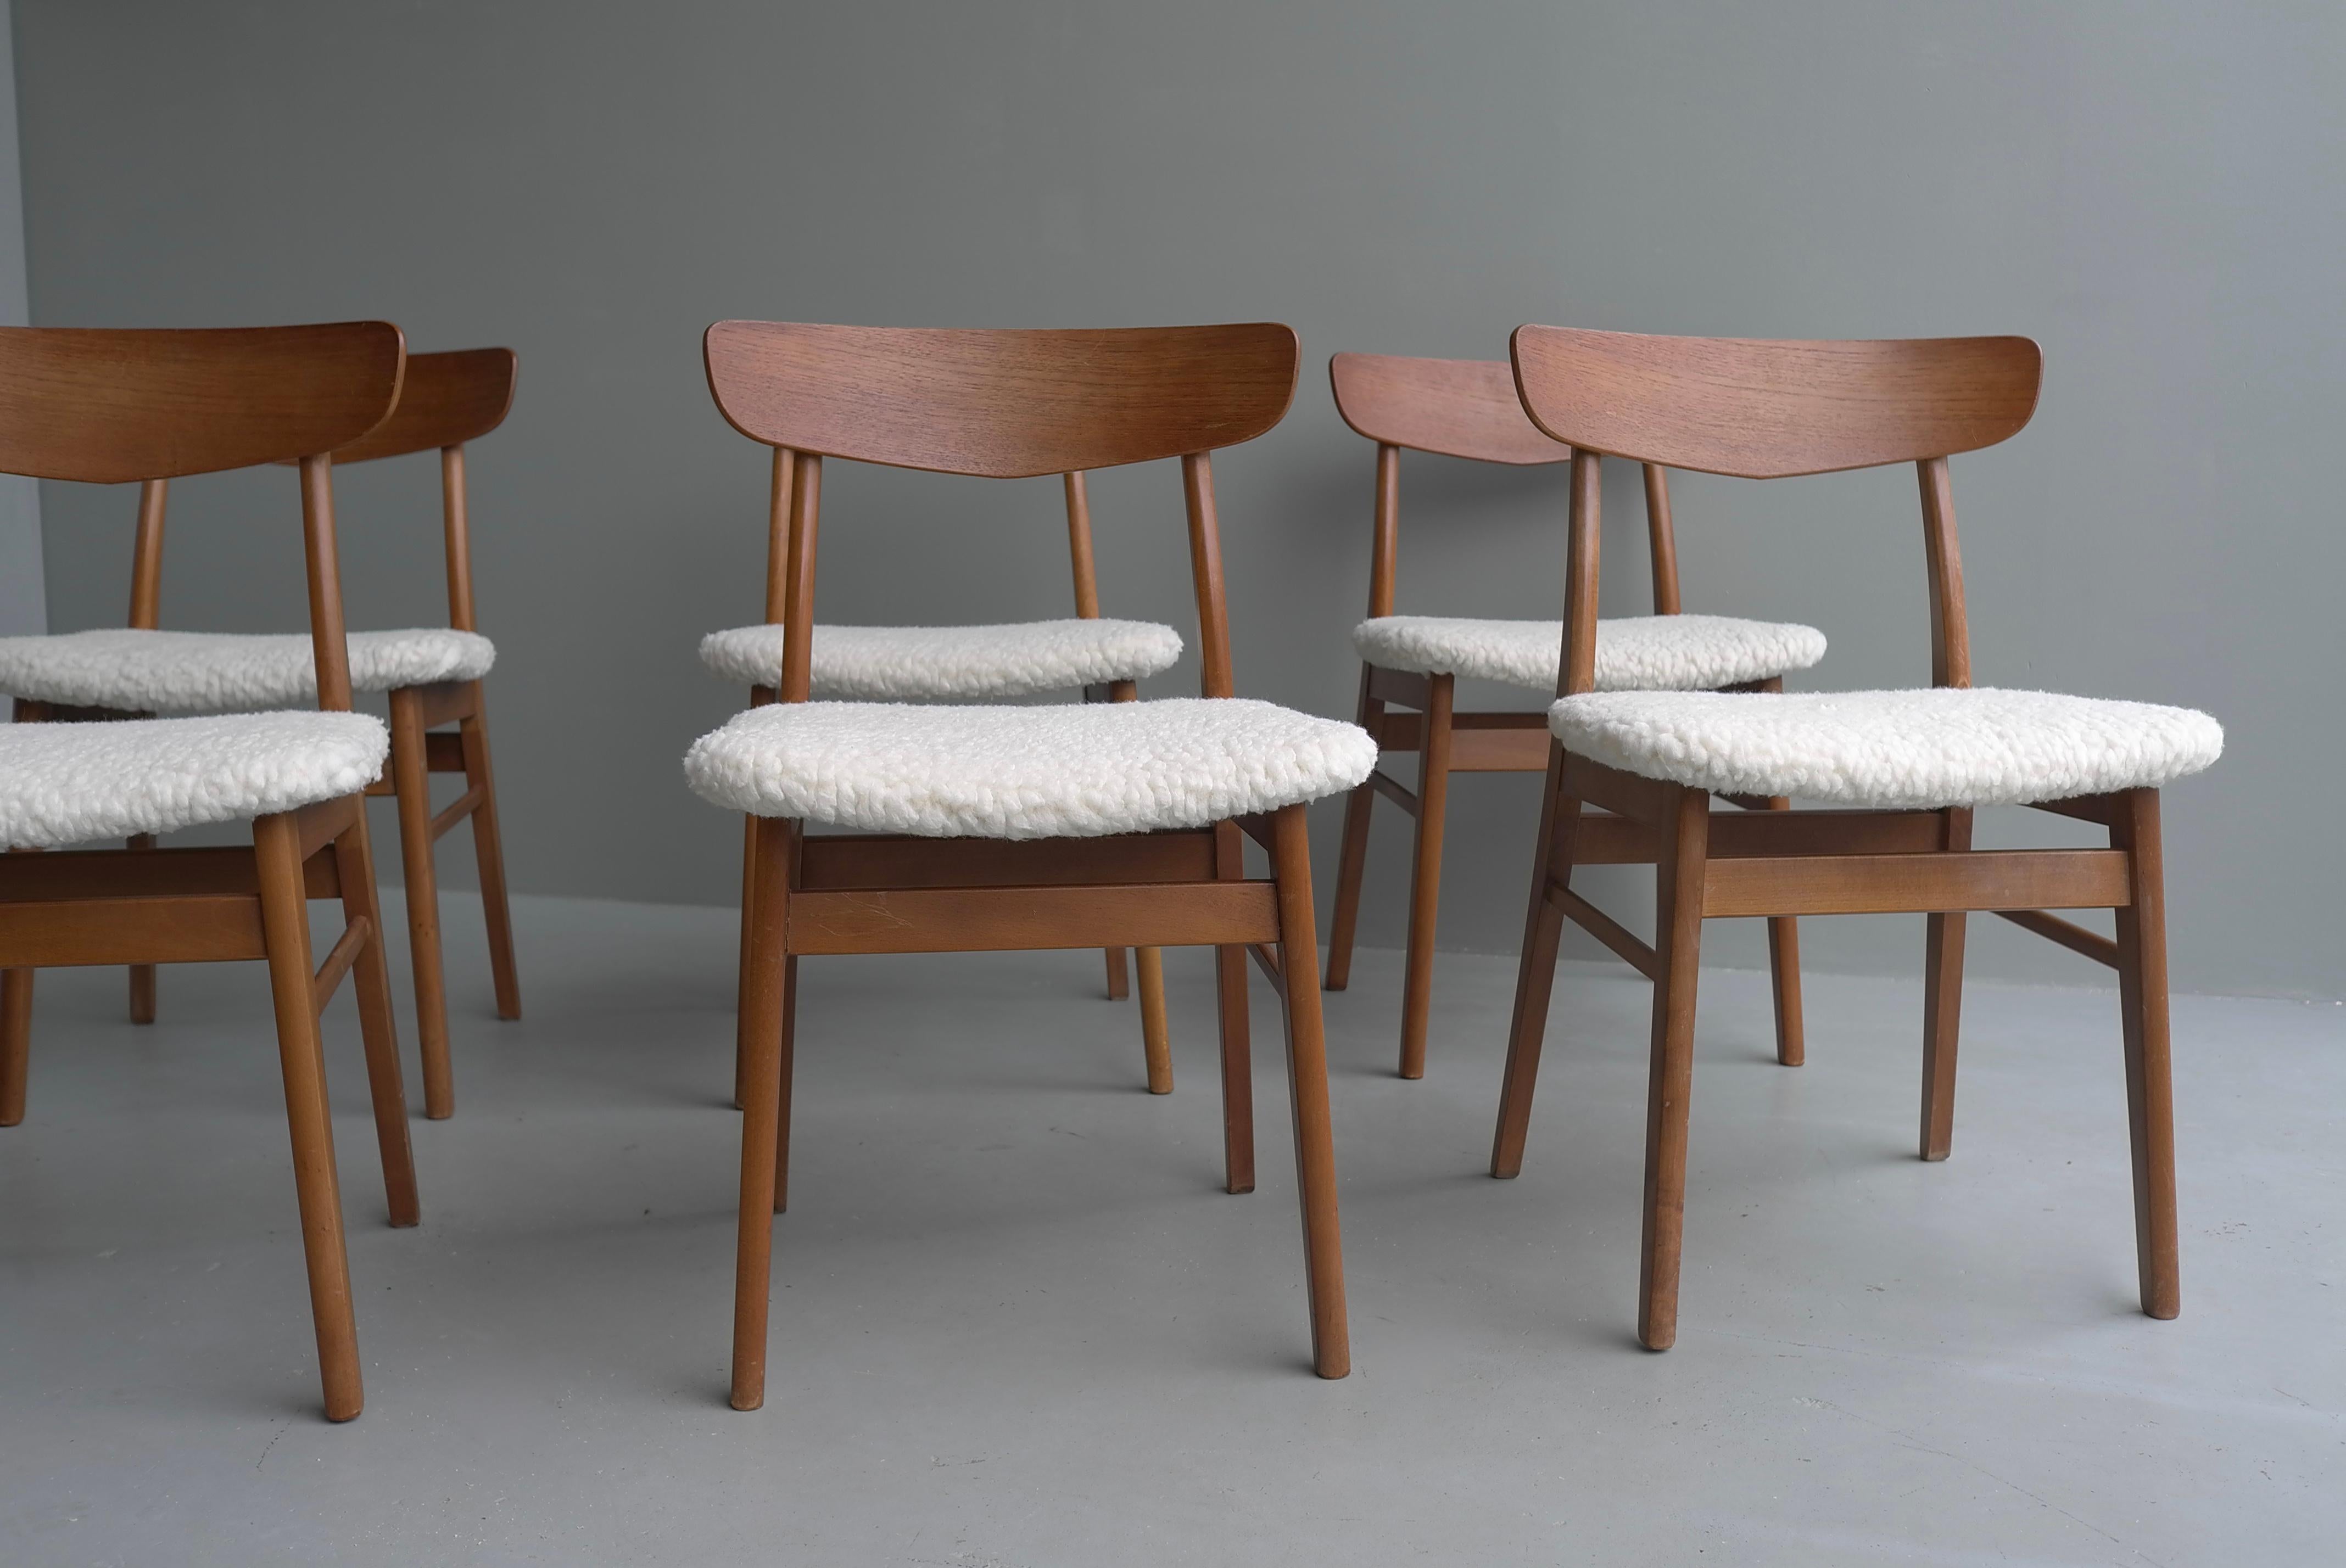 Six Teak Danish Heart Chairs with Seats in Pure Merino Wool, by Farstrup Møbler 9